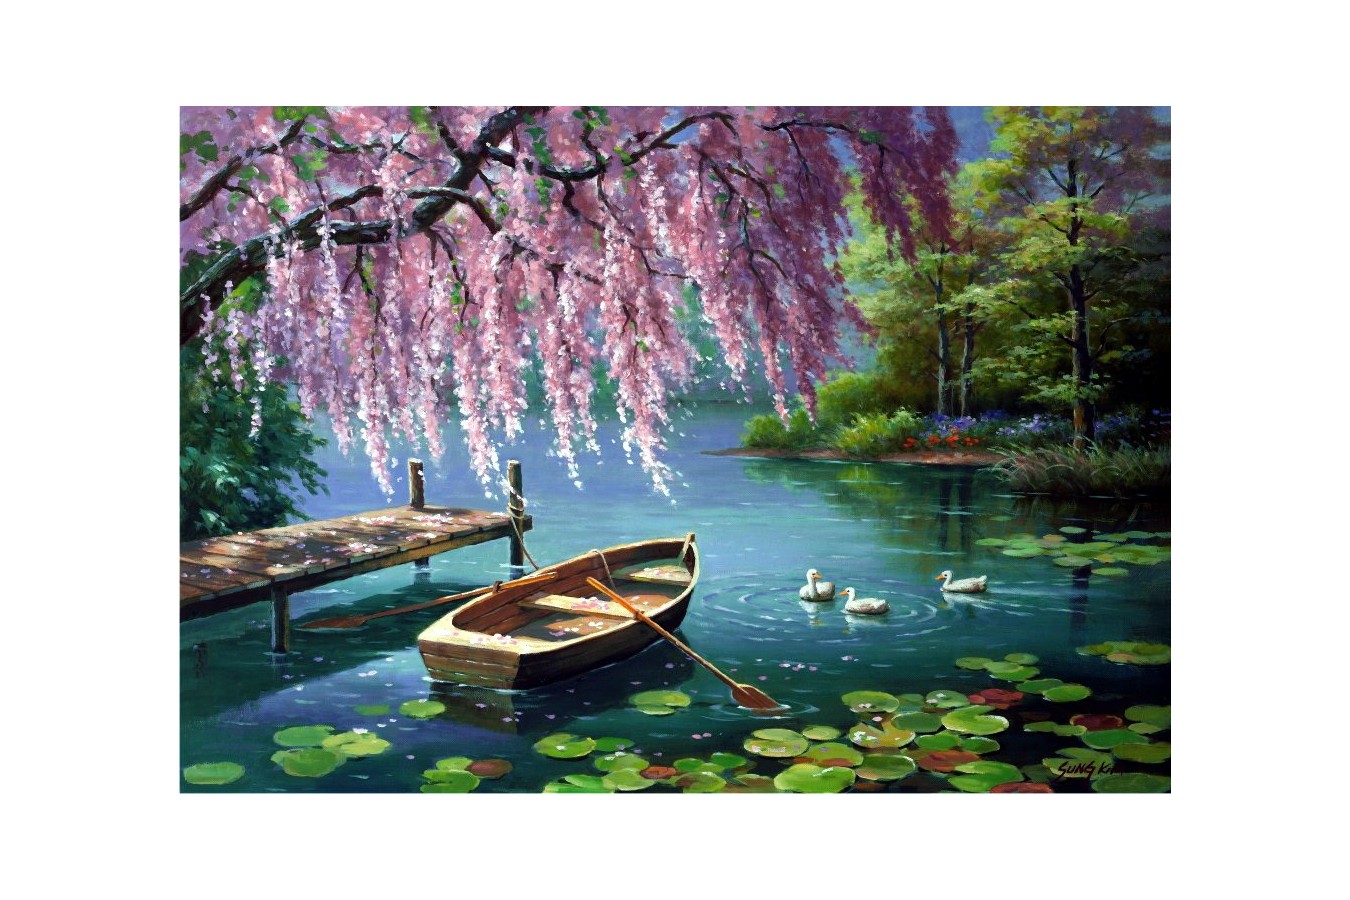 Puzzle Anatolian - Willow Spring Beauty, 500 piese (3573)